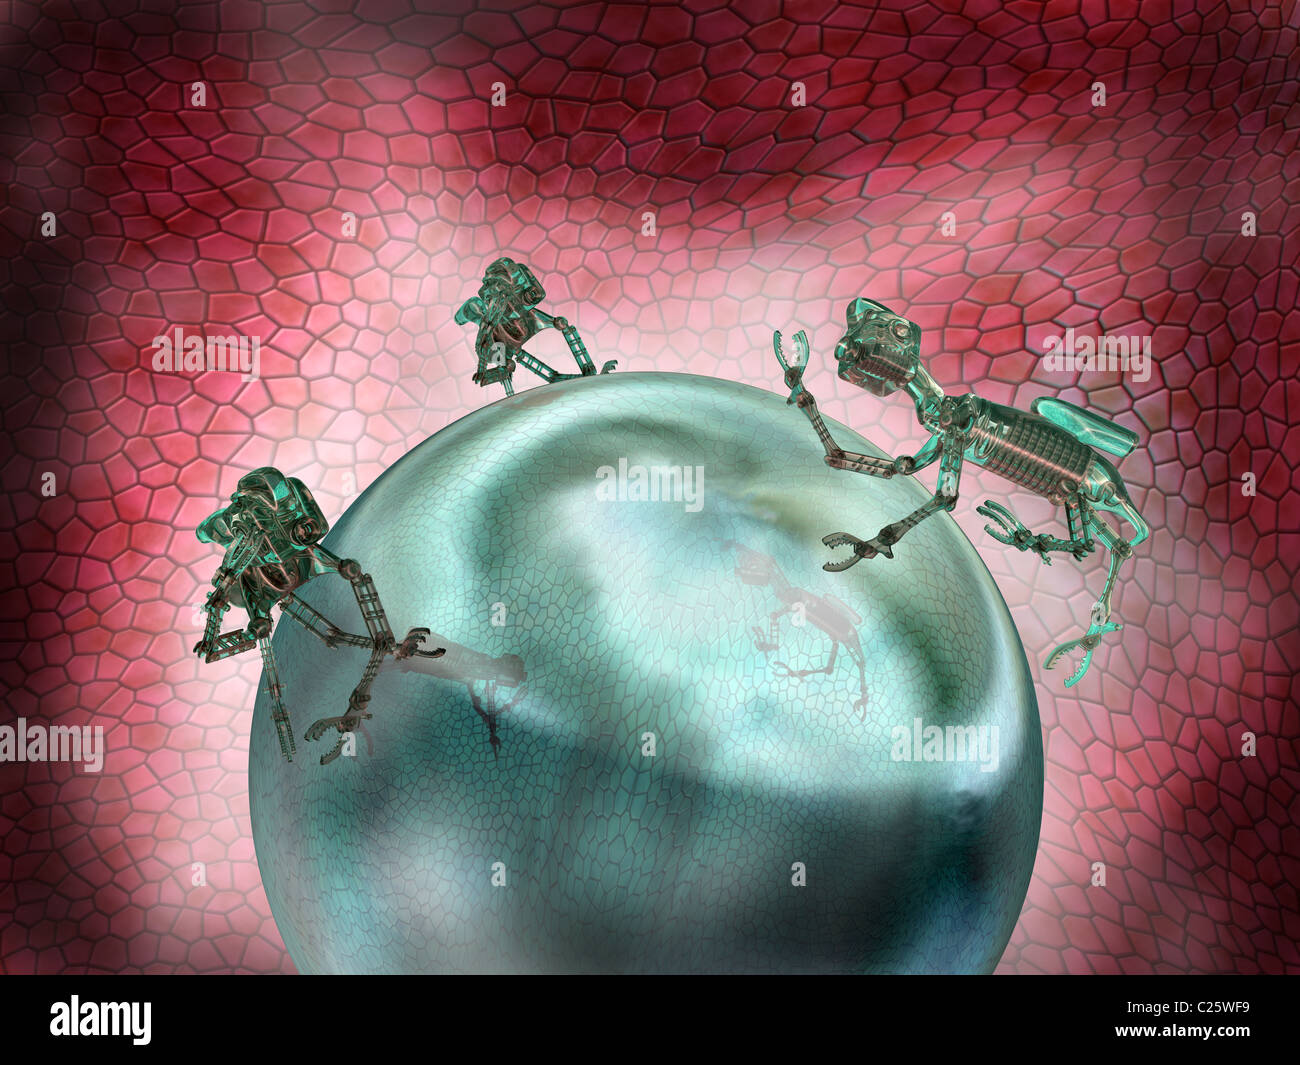 Illustration of nanobots working together as a team Stock Photo